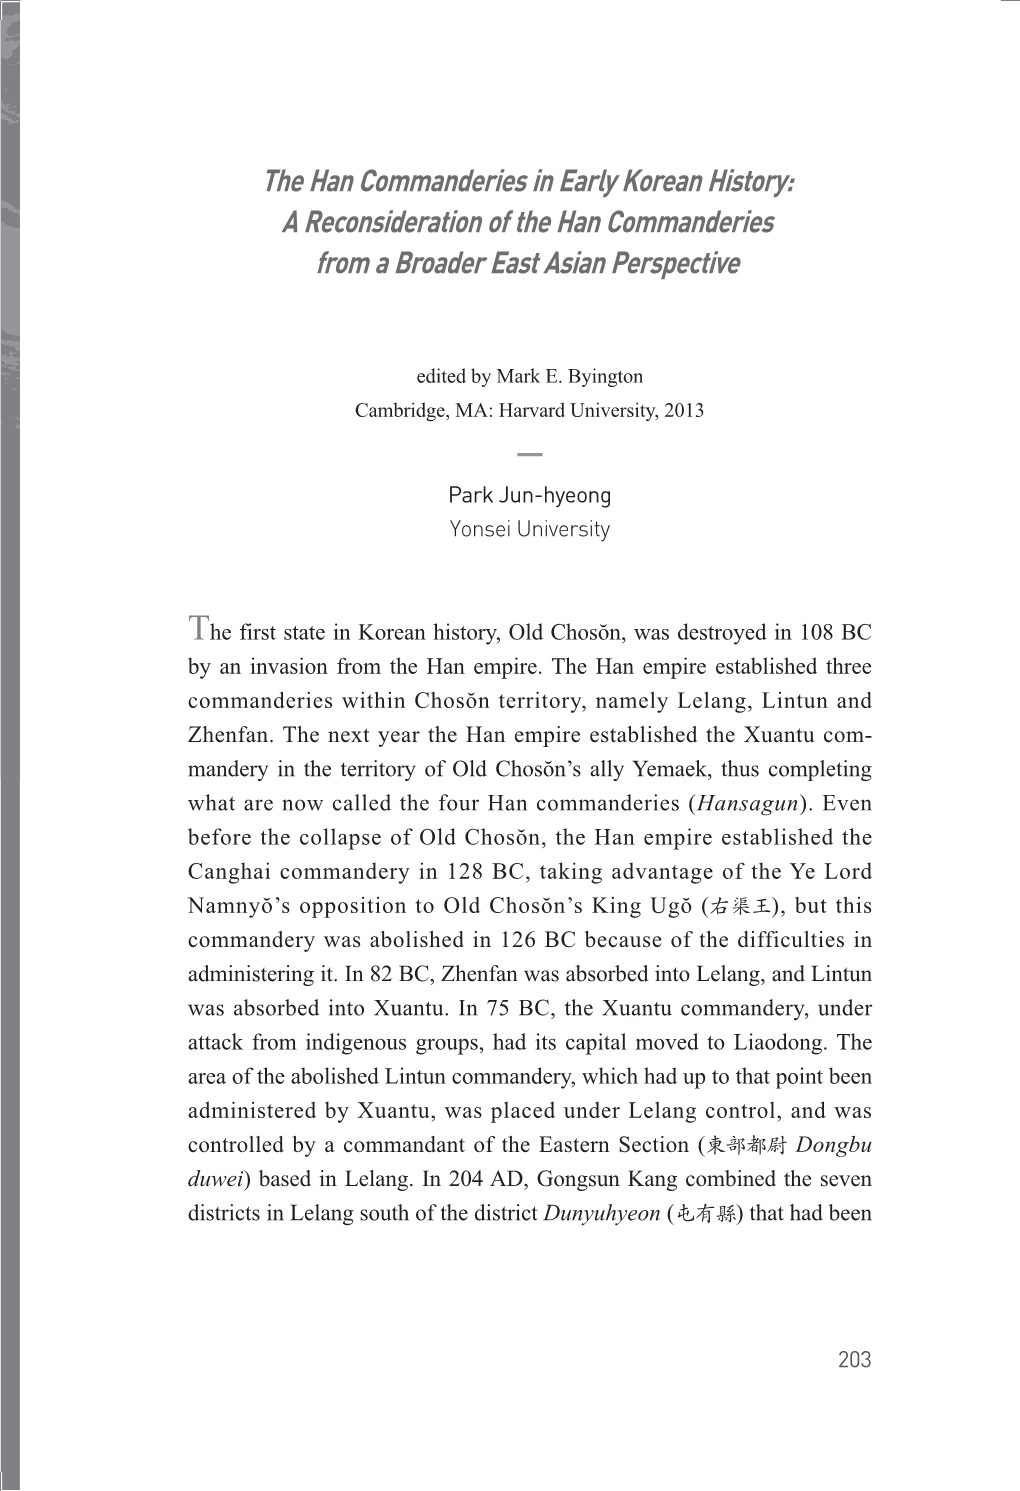 The Han Commanderies in Early Korean History: a Reconsideration of the Han Commanderies from a Broader East Asian Perspective